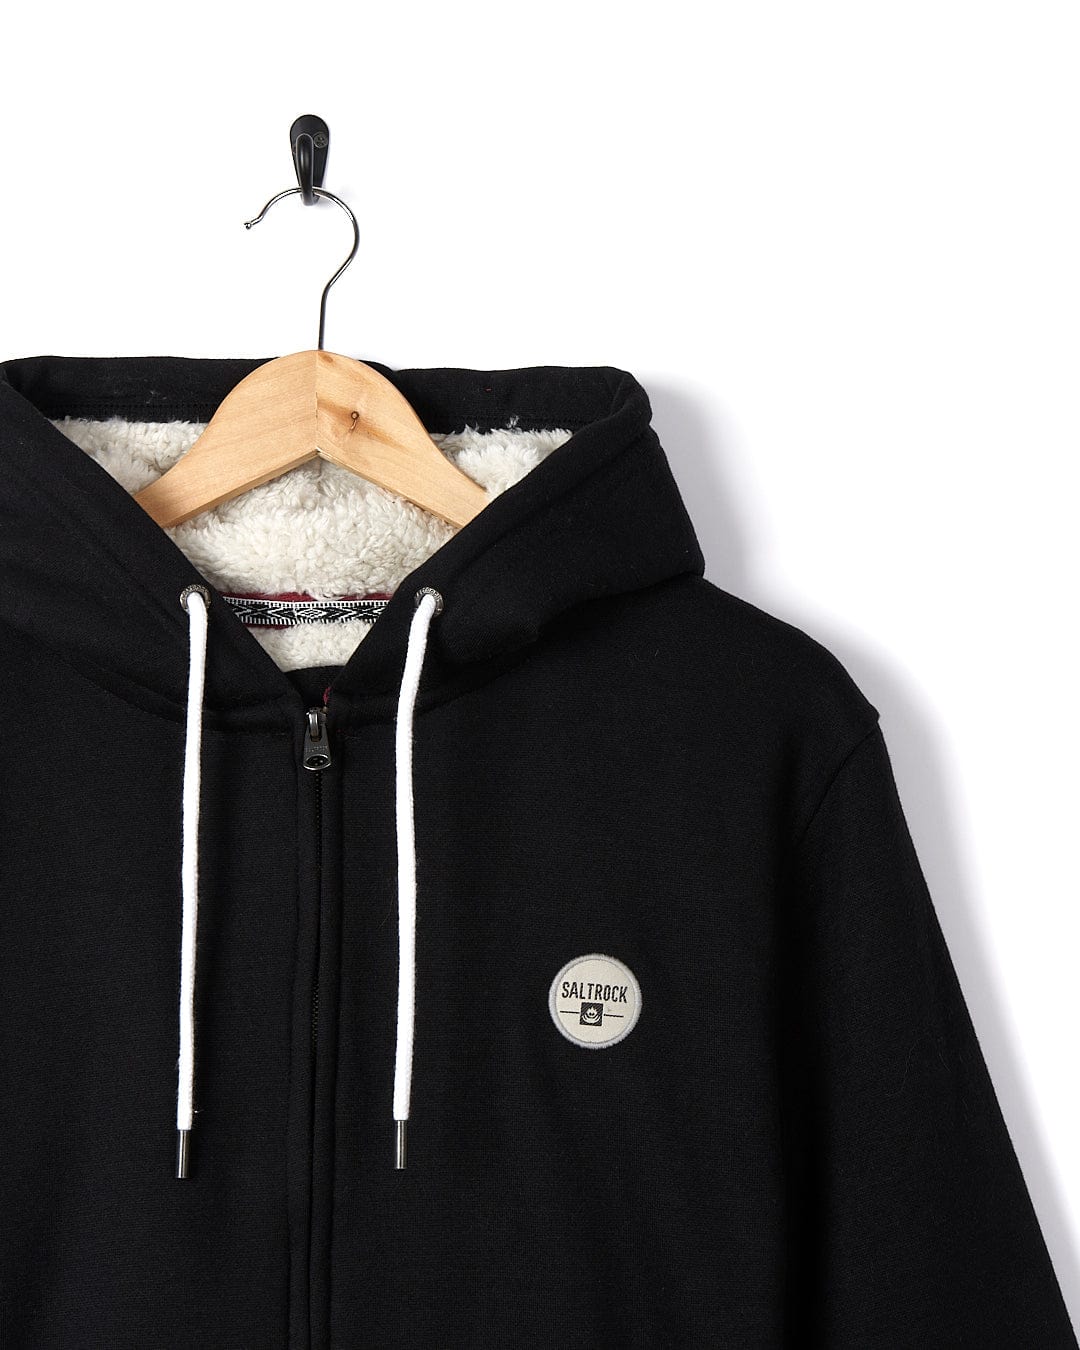 A Rebelto - Mens Fur Lined Hoodie - Black with a white logo on it.